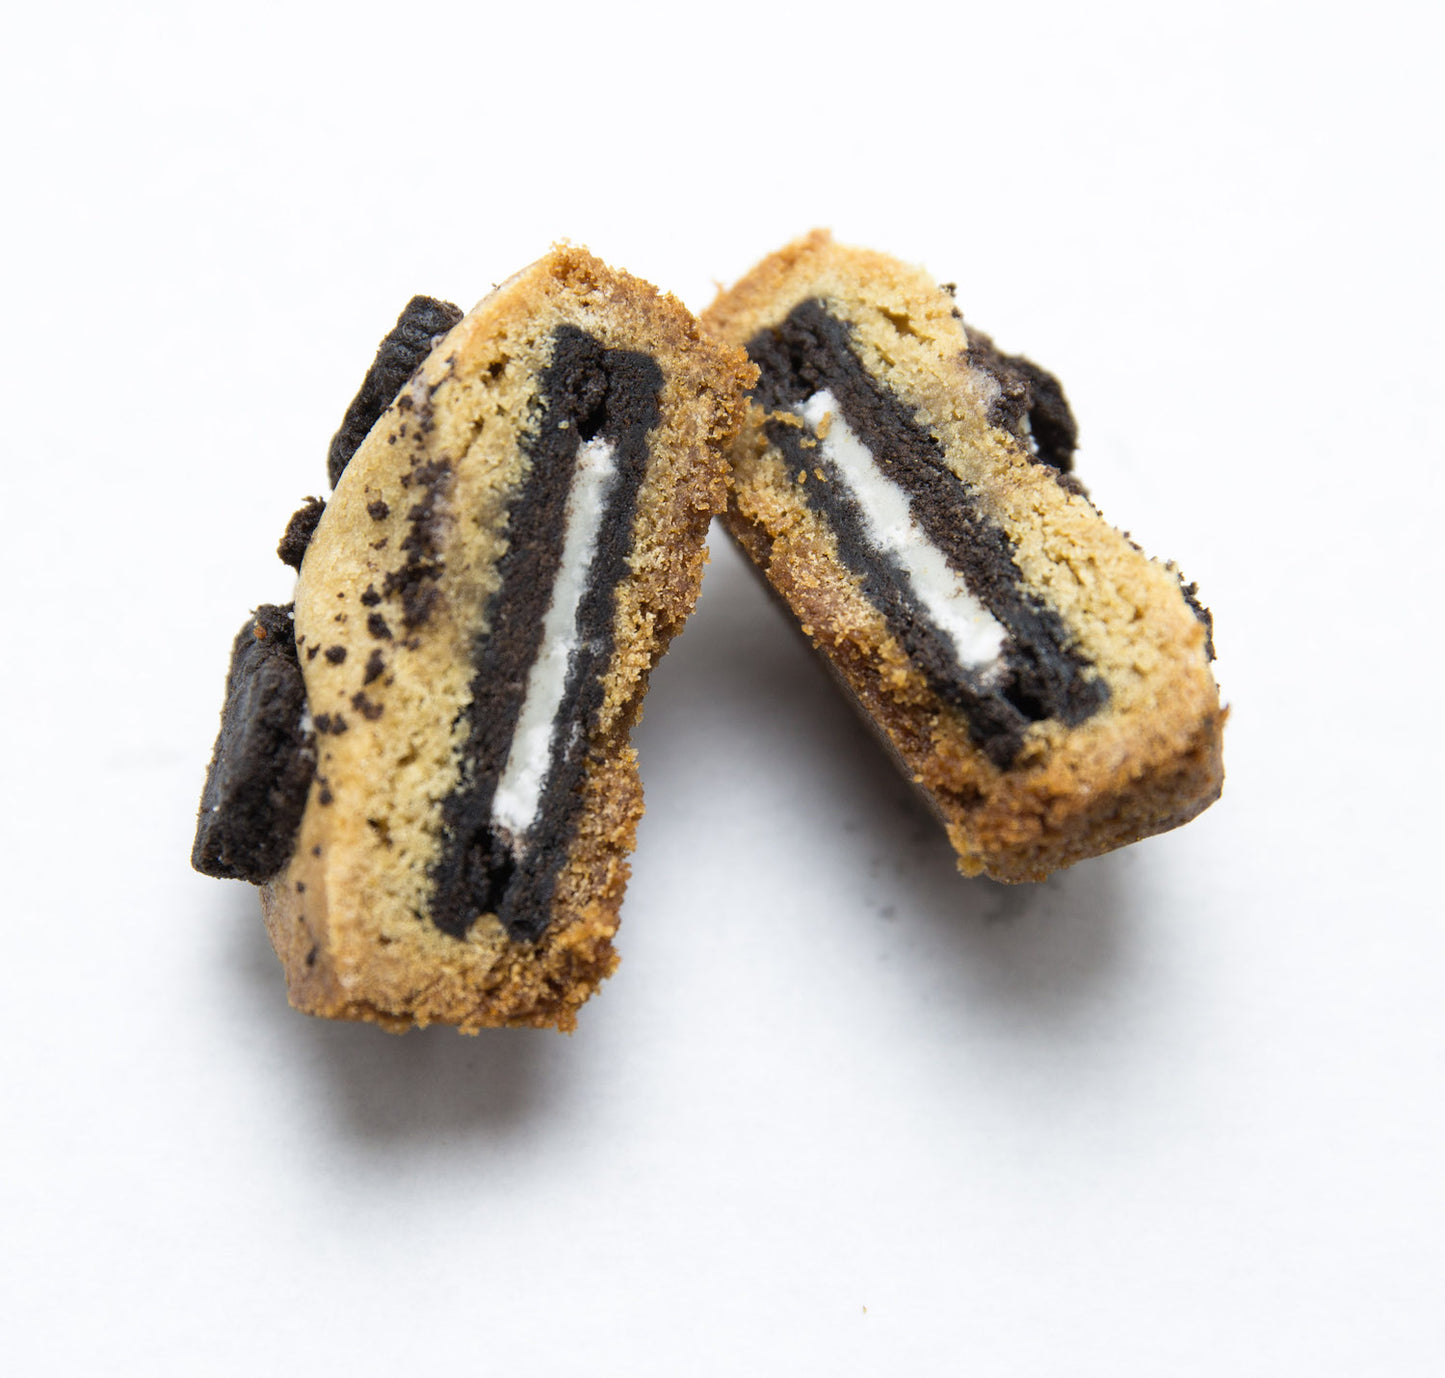 Cookies ‘n’ Cream — Tumbeler Cookie with an Oreo Center & Topped with Oreo Cookie Crumble